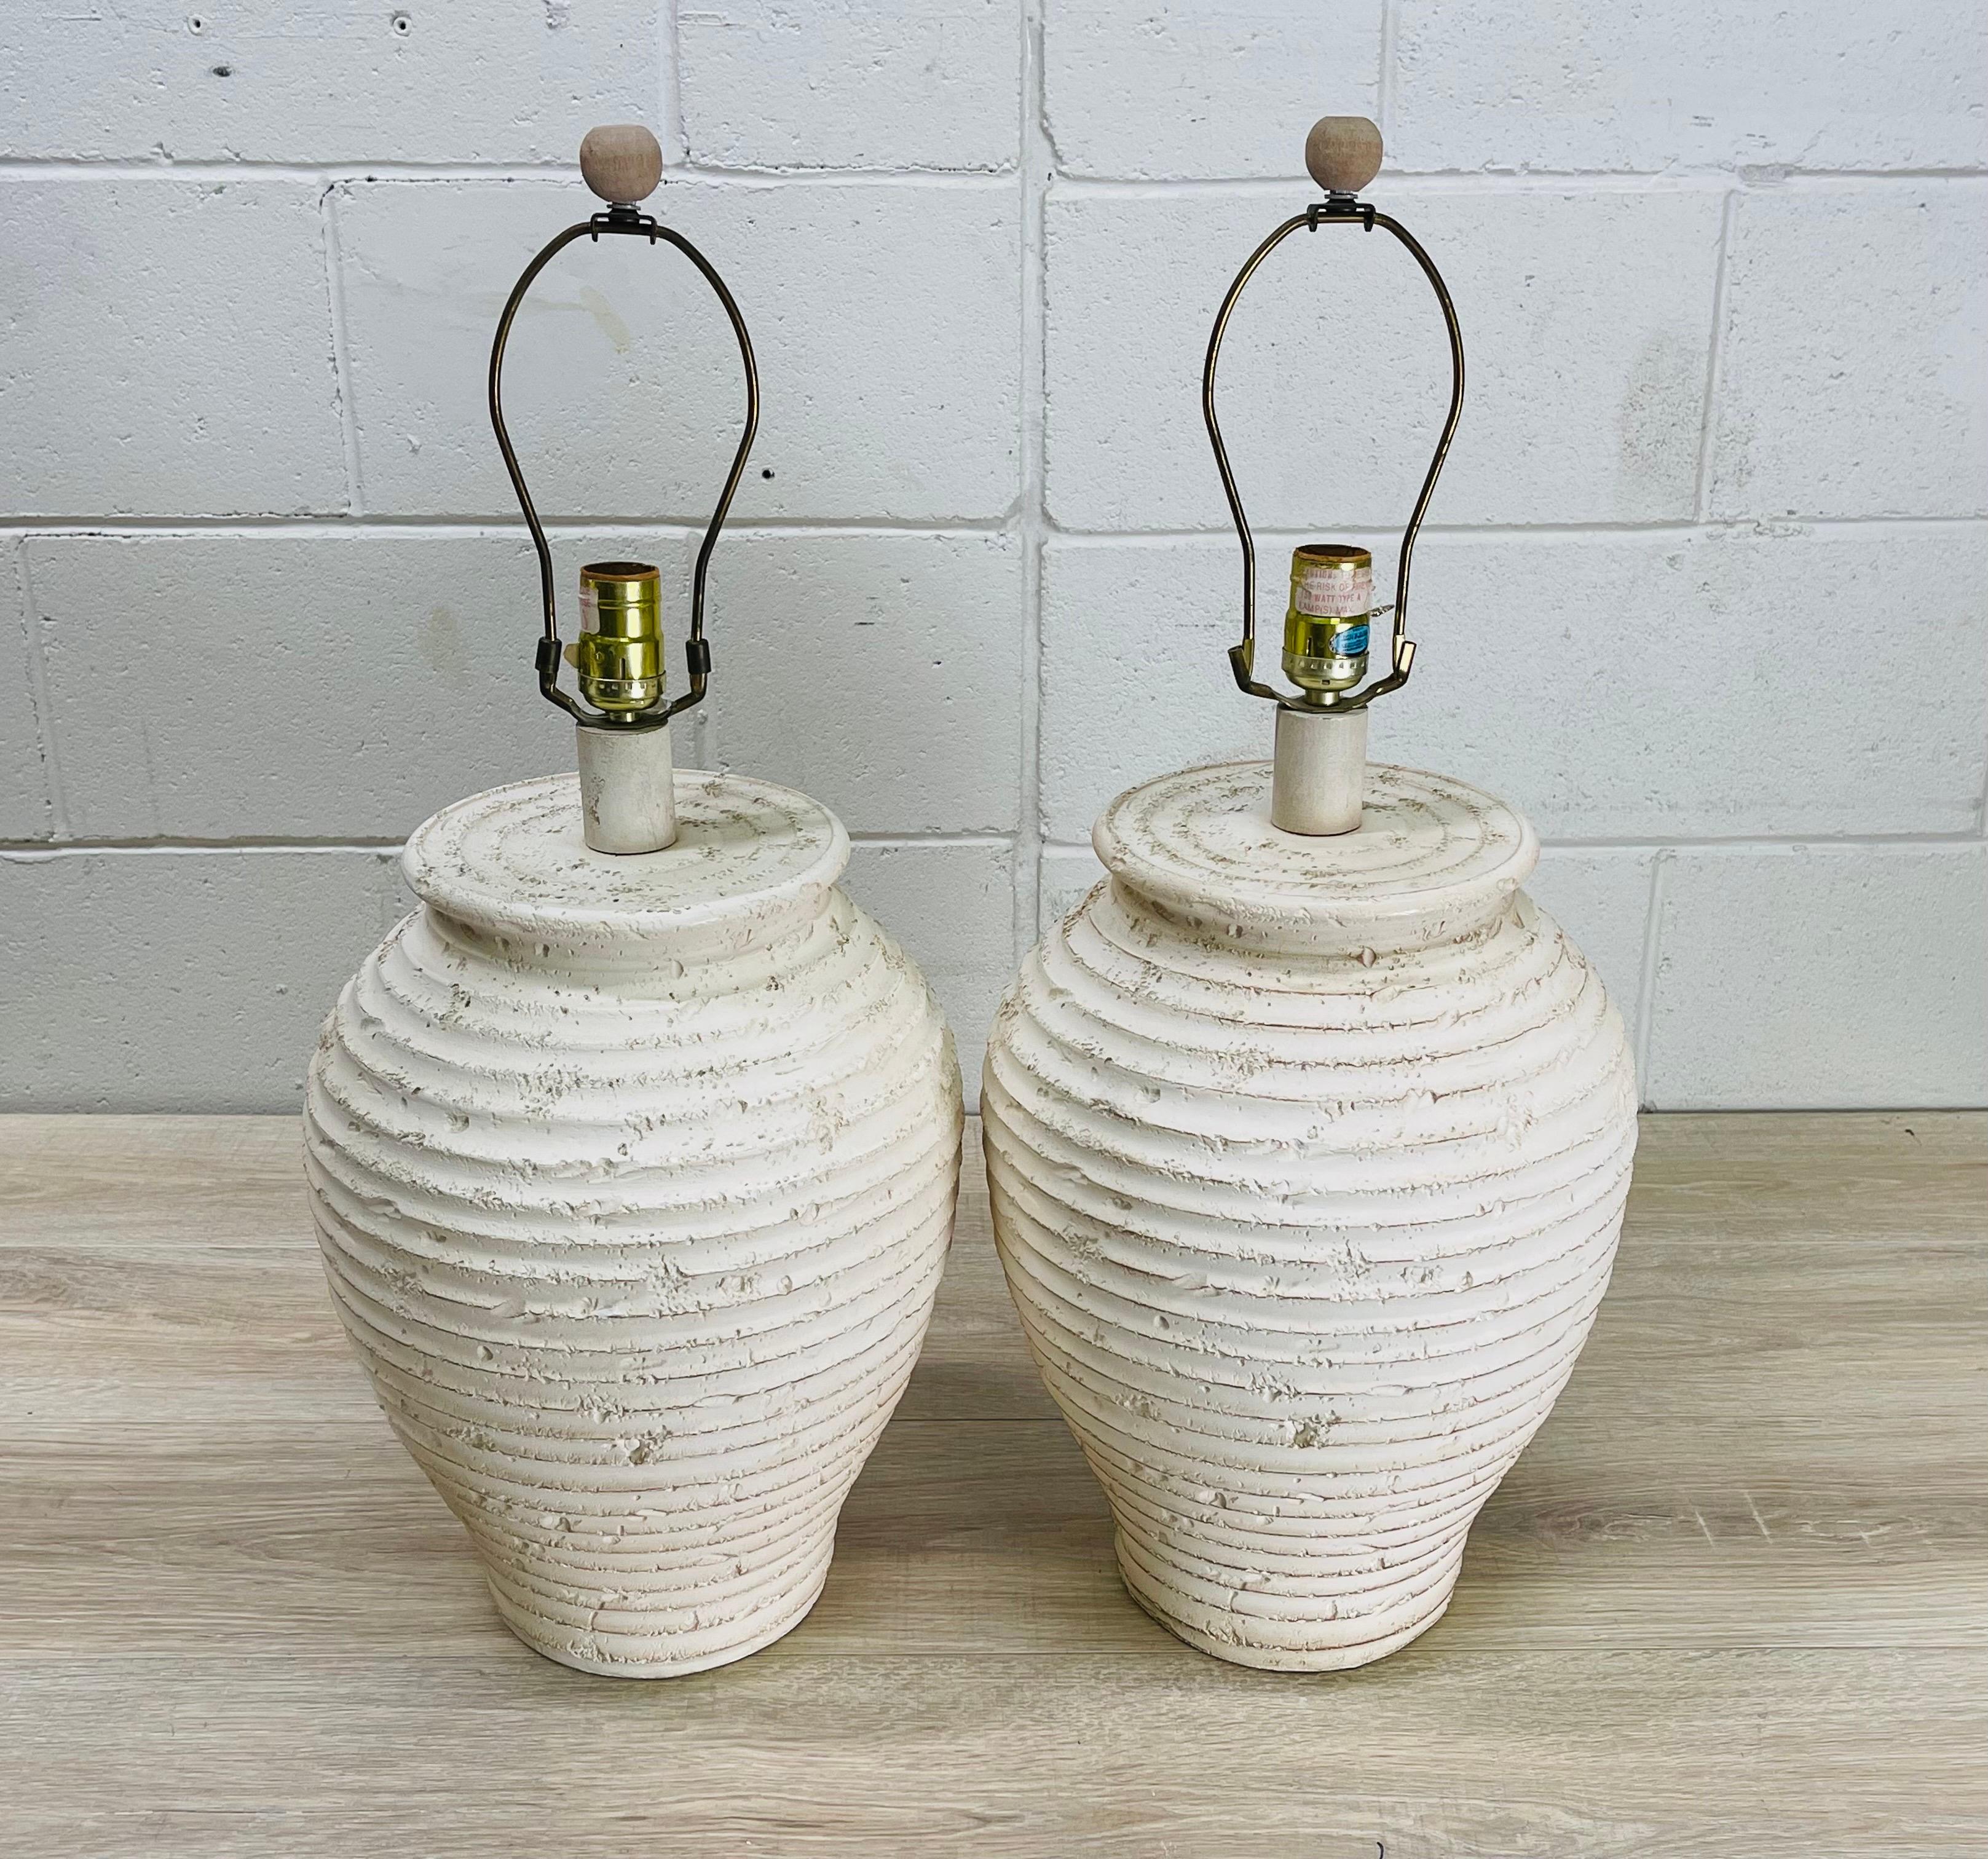 Vintage 1980s pair of ribbed white pottery table lamps. The lamps are wired for the US and in working condition. The lamps have a ribbed design and texture all over. The lamps use a standard 100W bulb. Measures: Socket, 19.5” H. Harp, 4” Diameter x